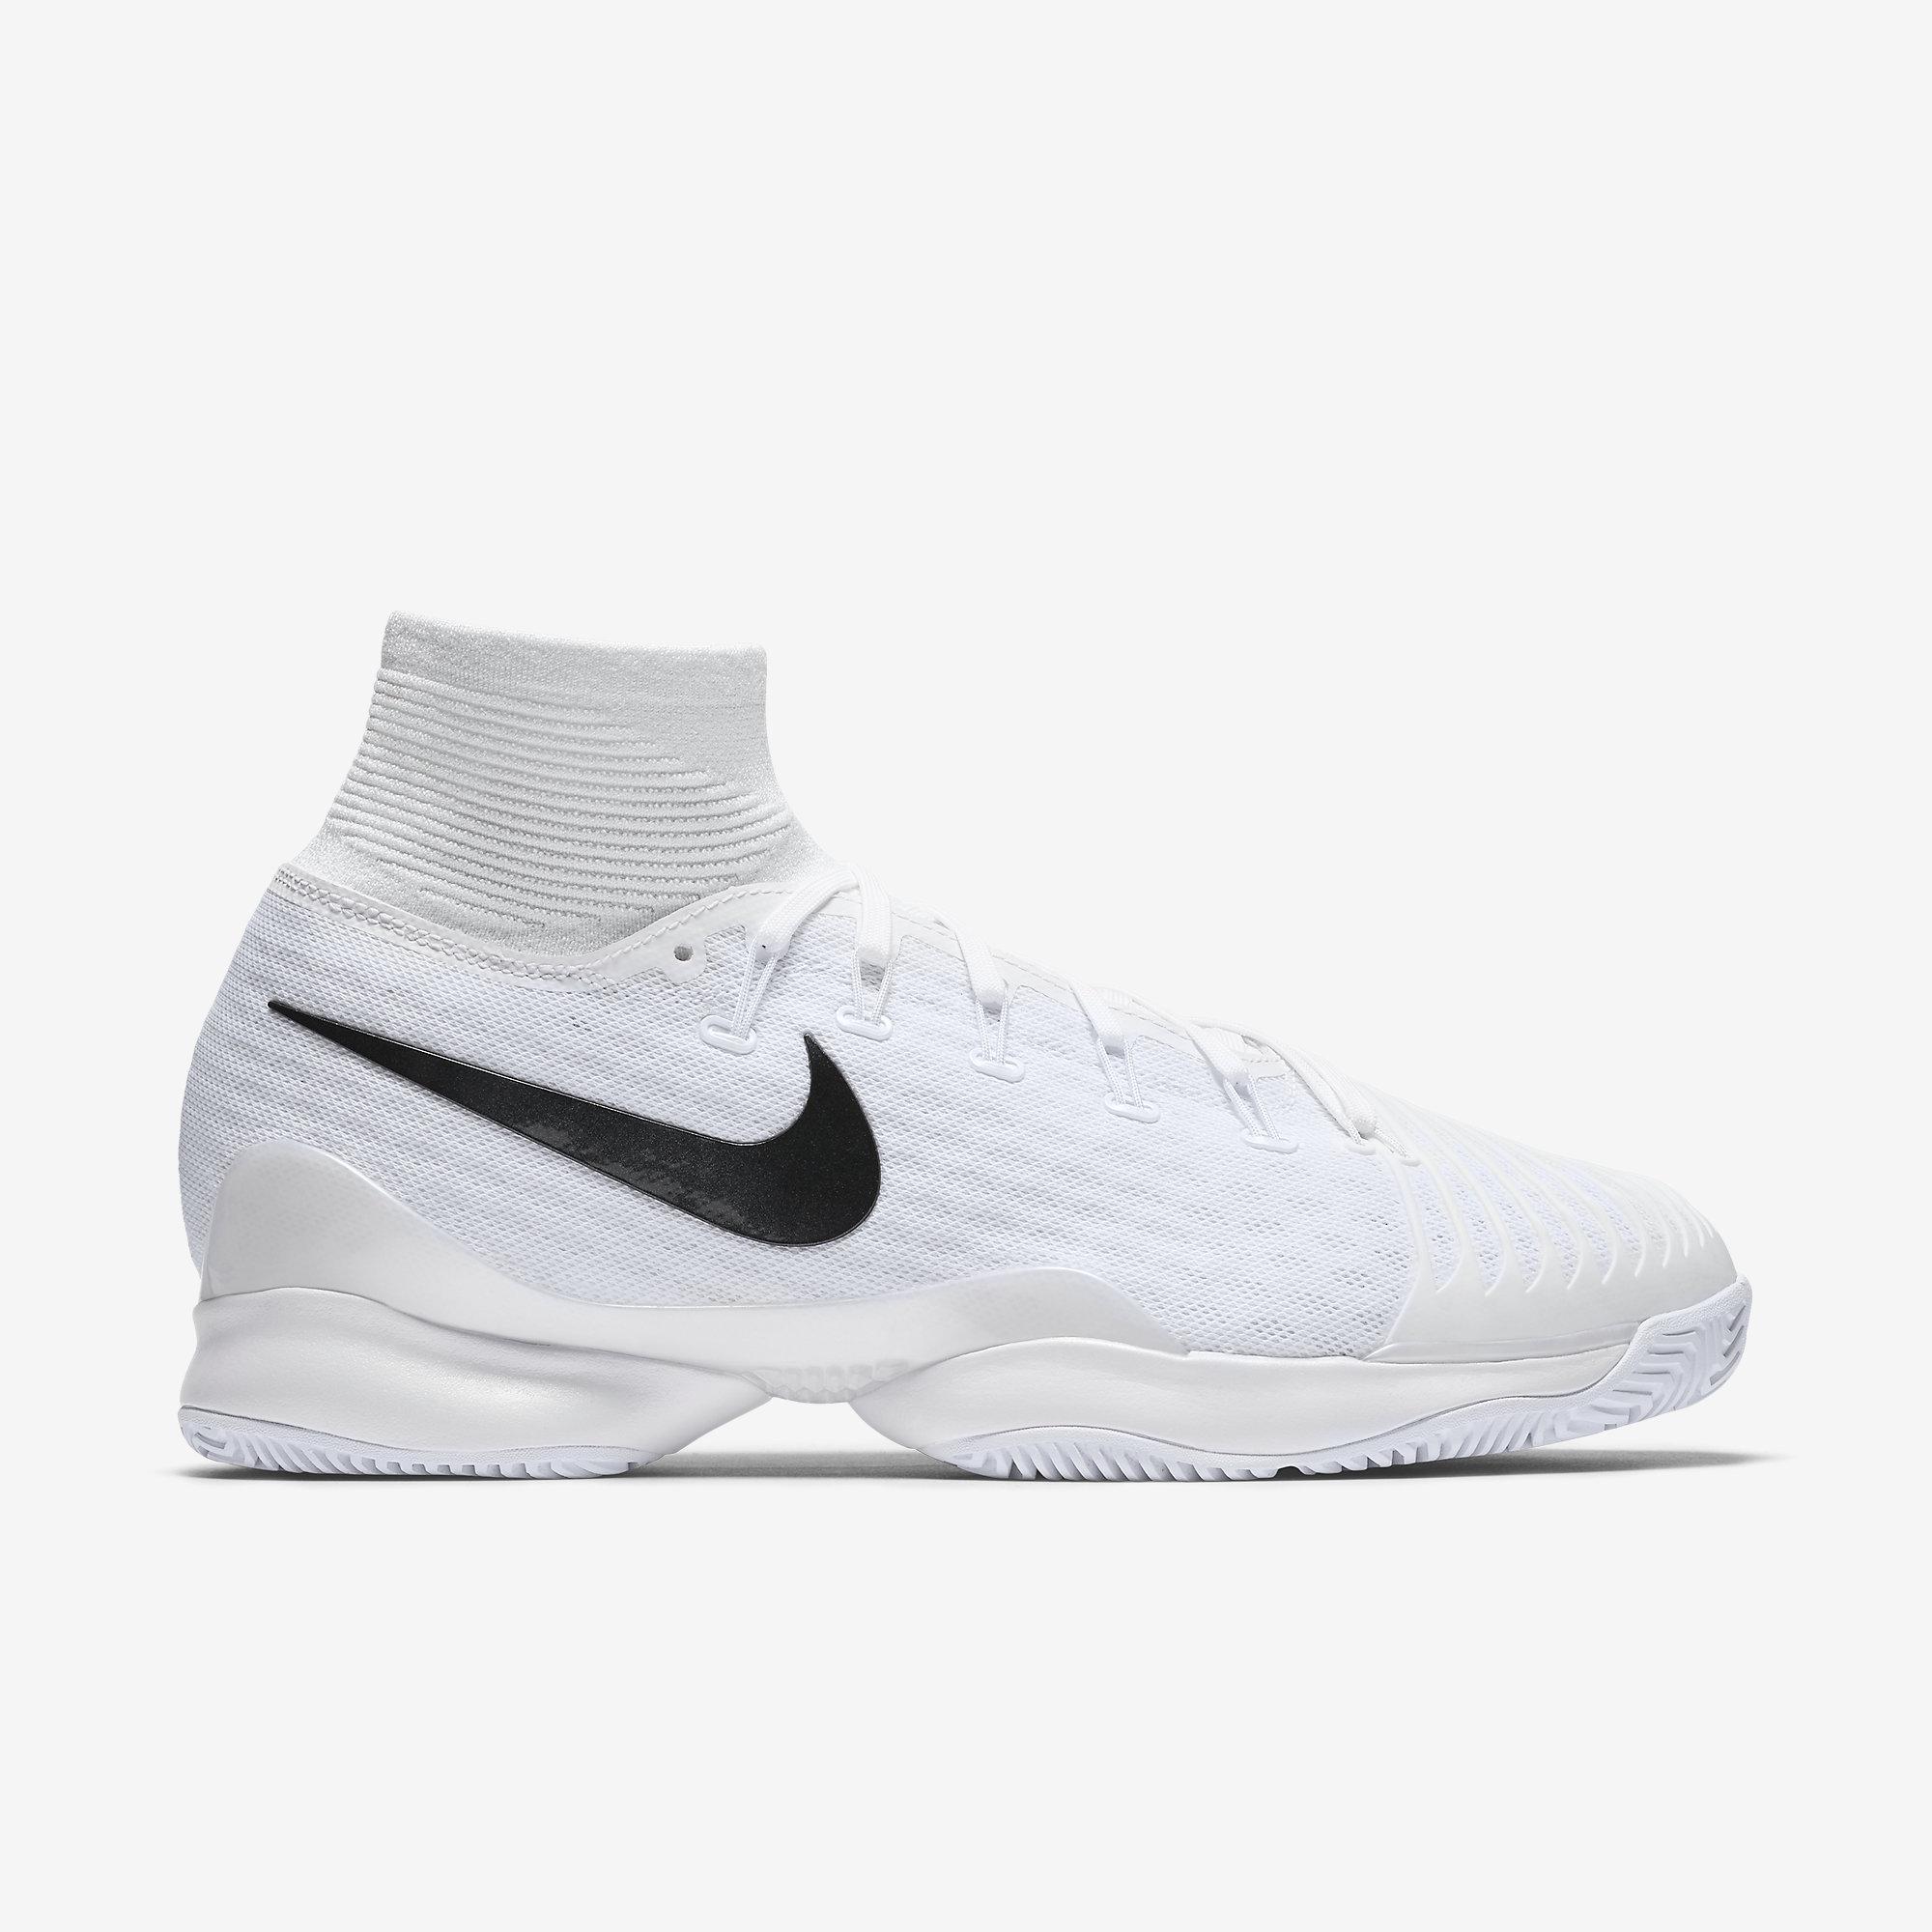 Nike Mens Air Zoom Ultrafly Limited Edition Tennis Shoes - White -  